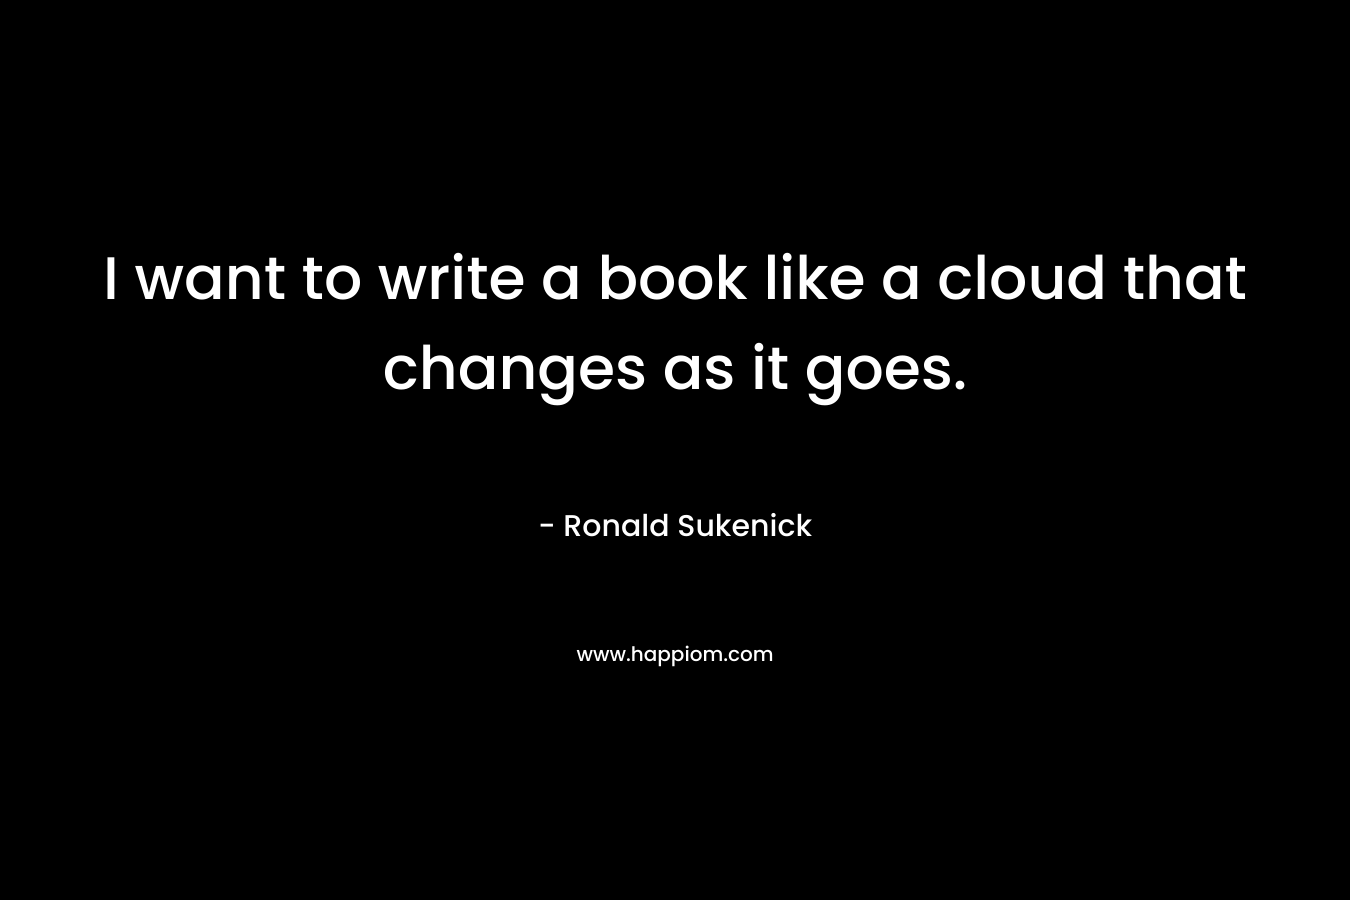 I want to write a book like a cloud that changes as it goes.